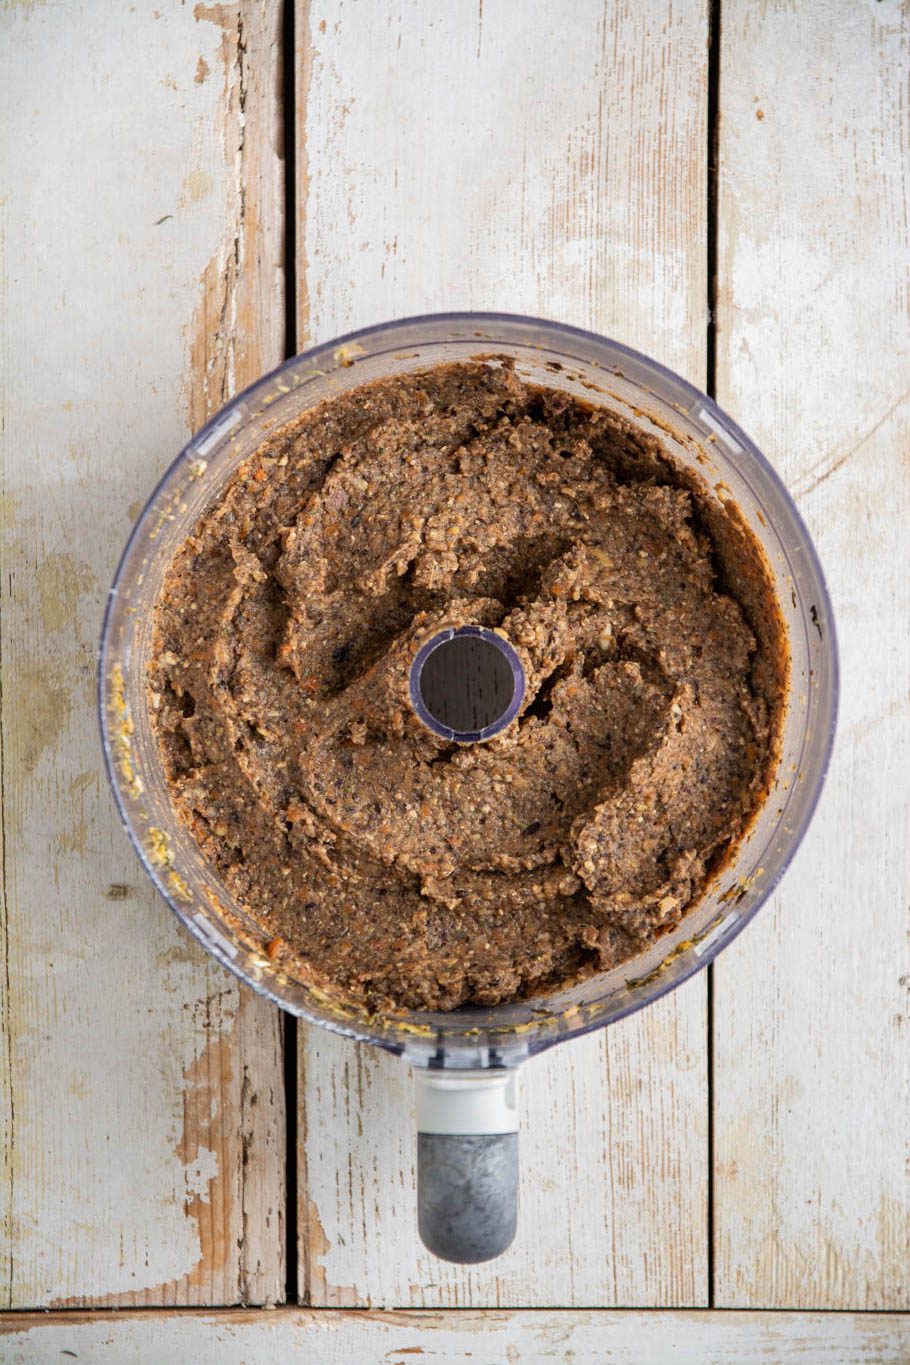 Learn how to make low-fat black bean hummus with soybeans, chickpeas, mushrooms, herbs, and carrots. You'll need 13 ingredients, a food processor, and 25 minutes of your time.